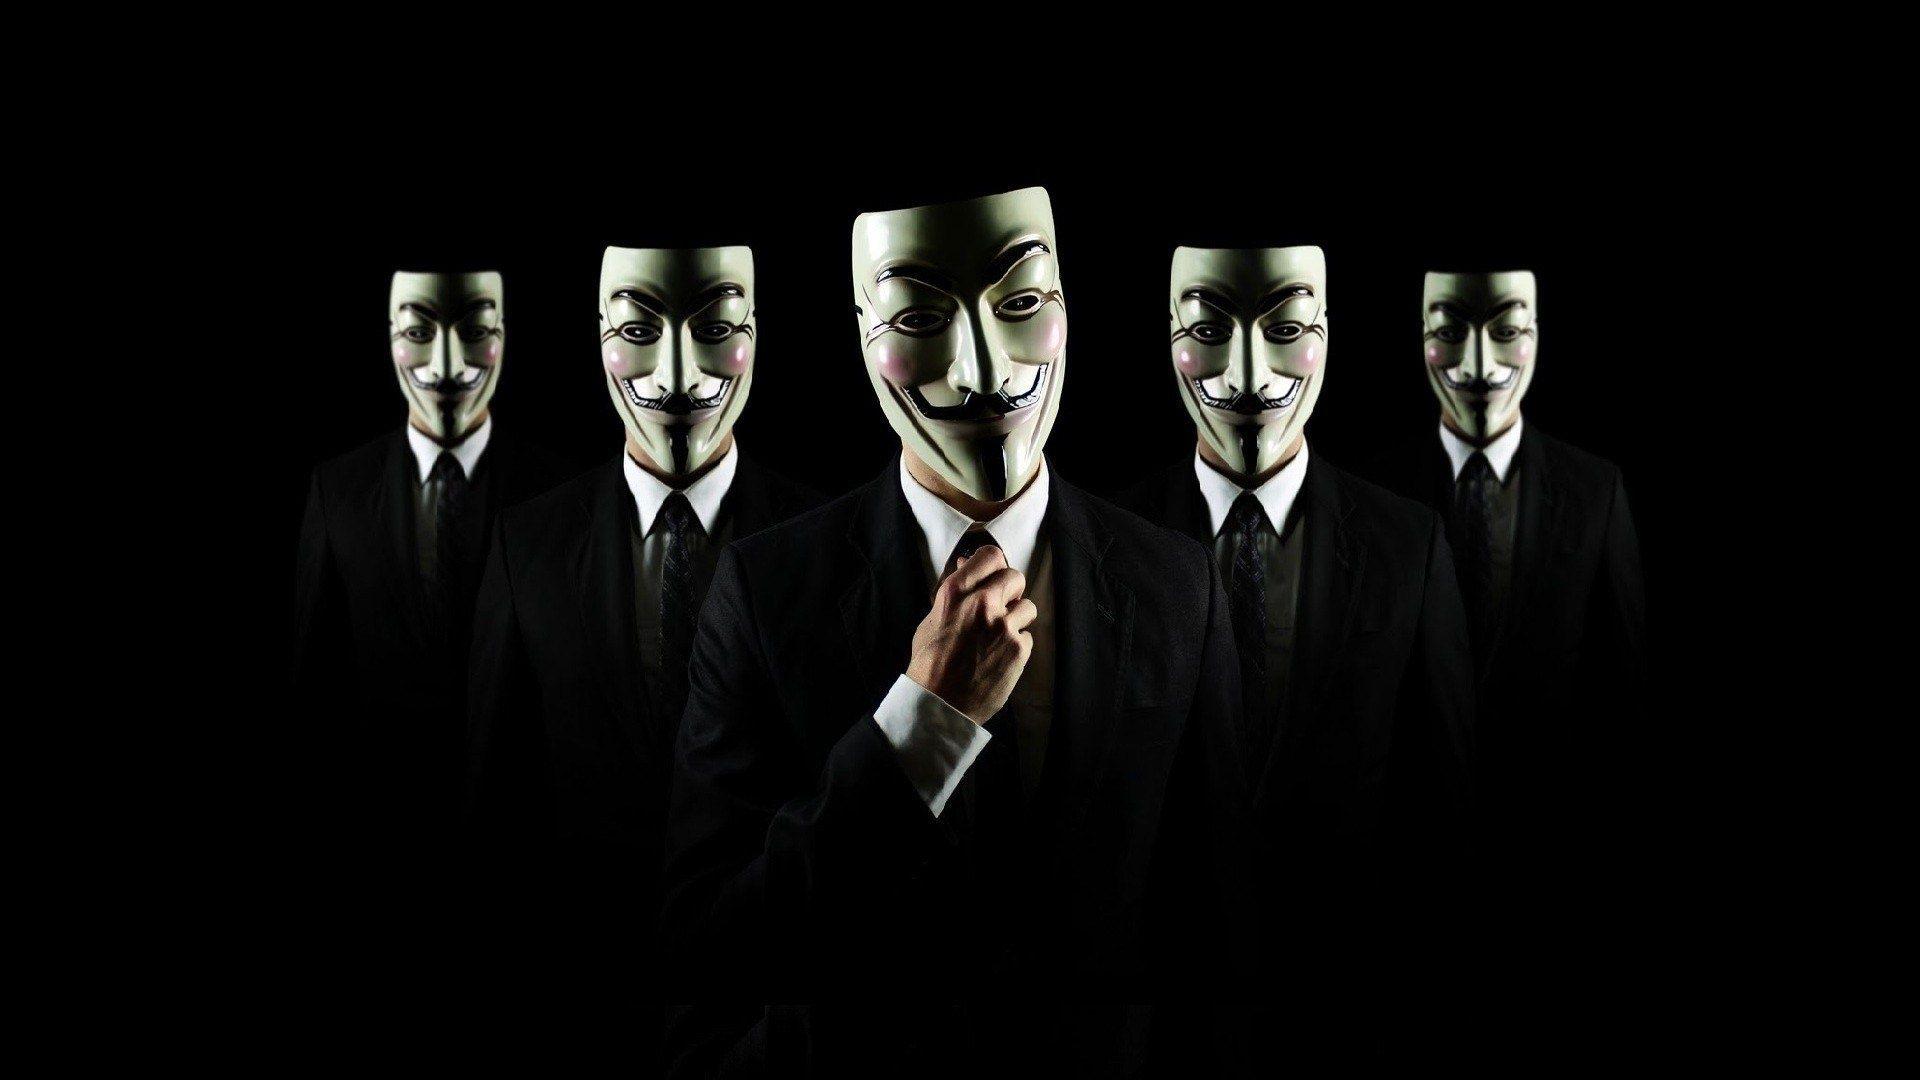 Anonymous Hackers HD Wallpaper, Background Image